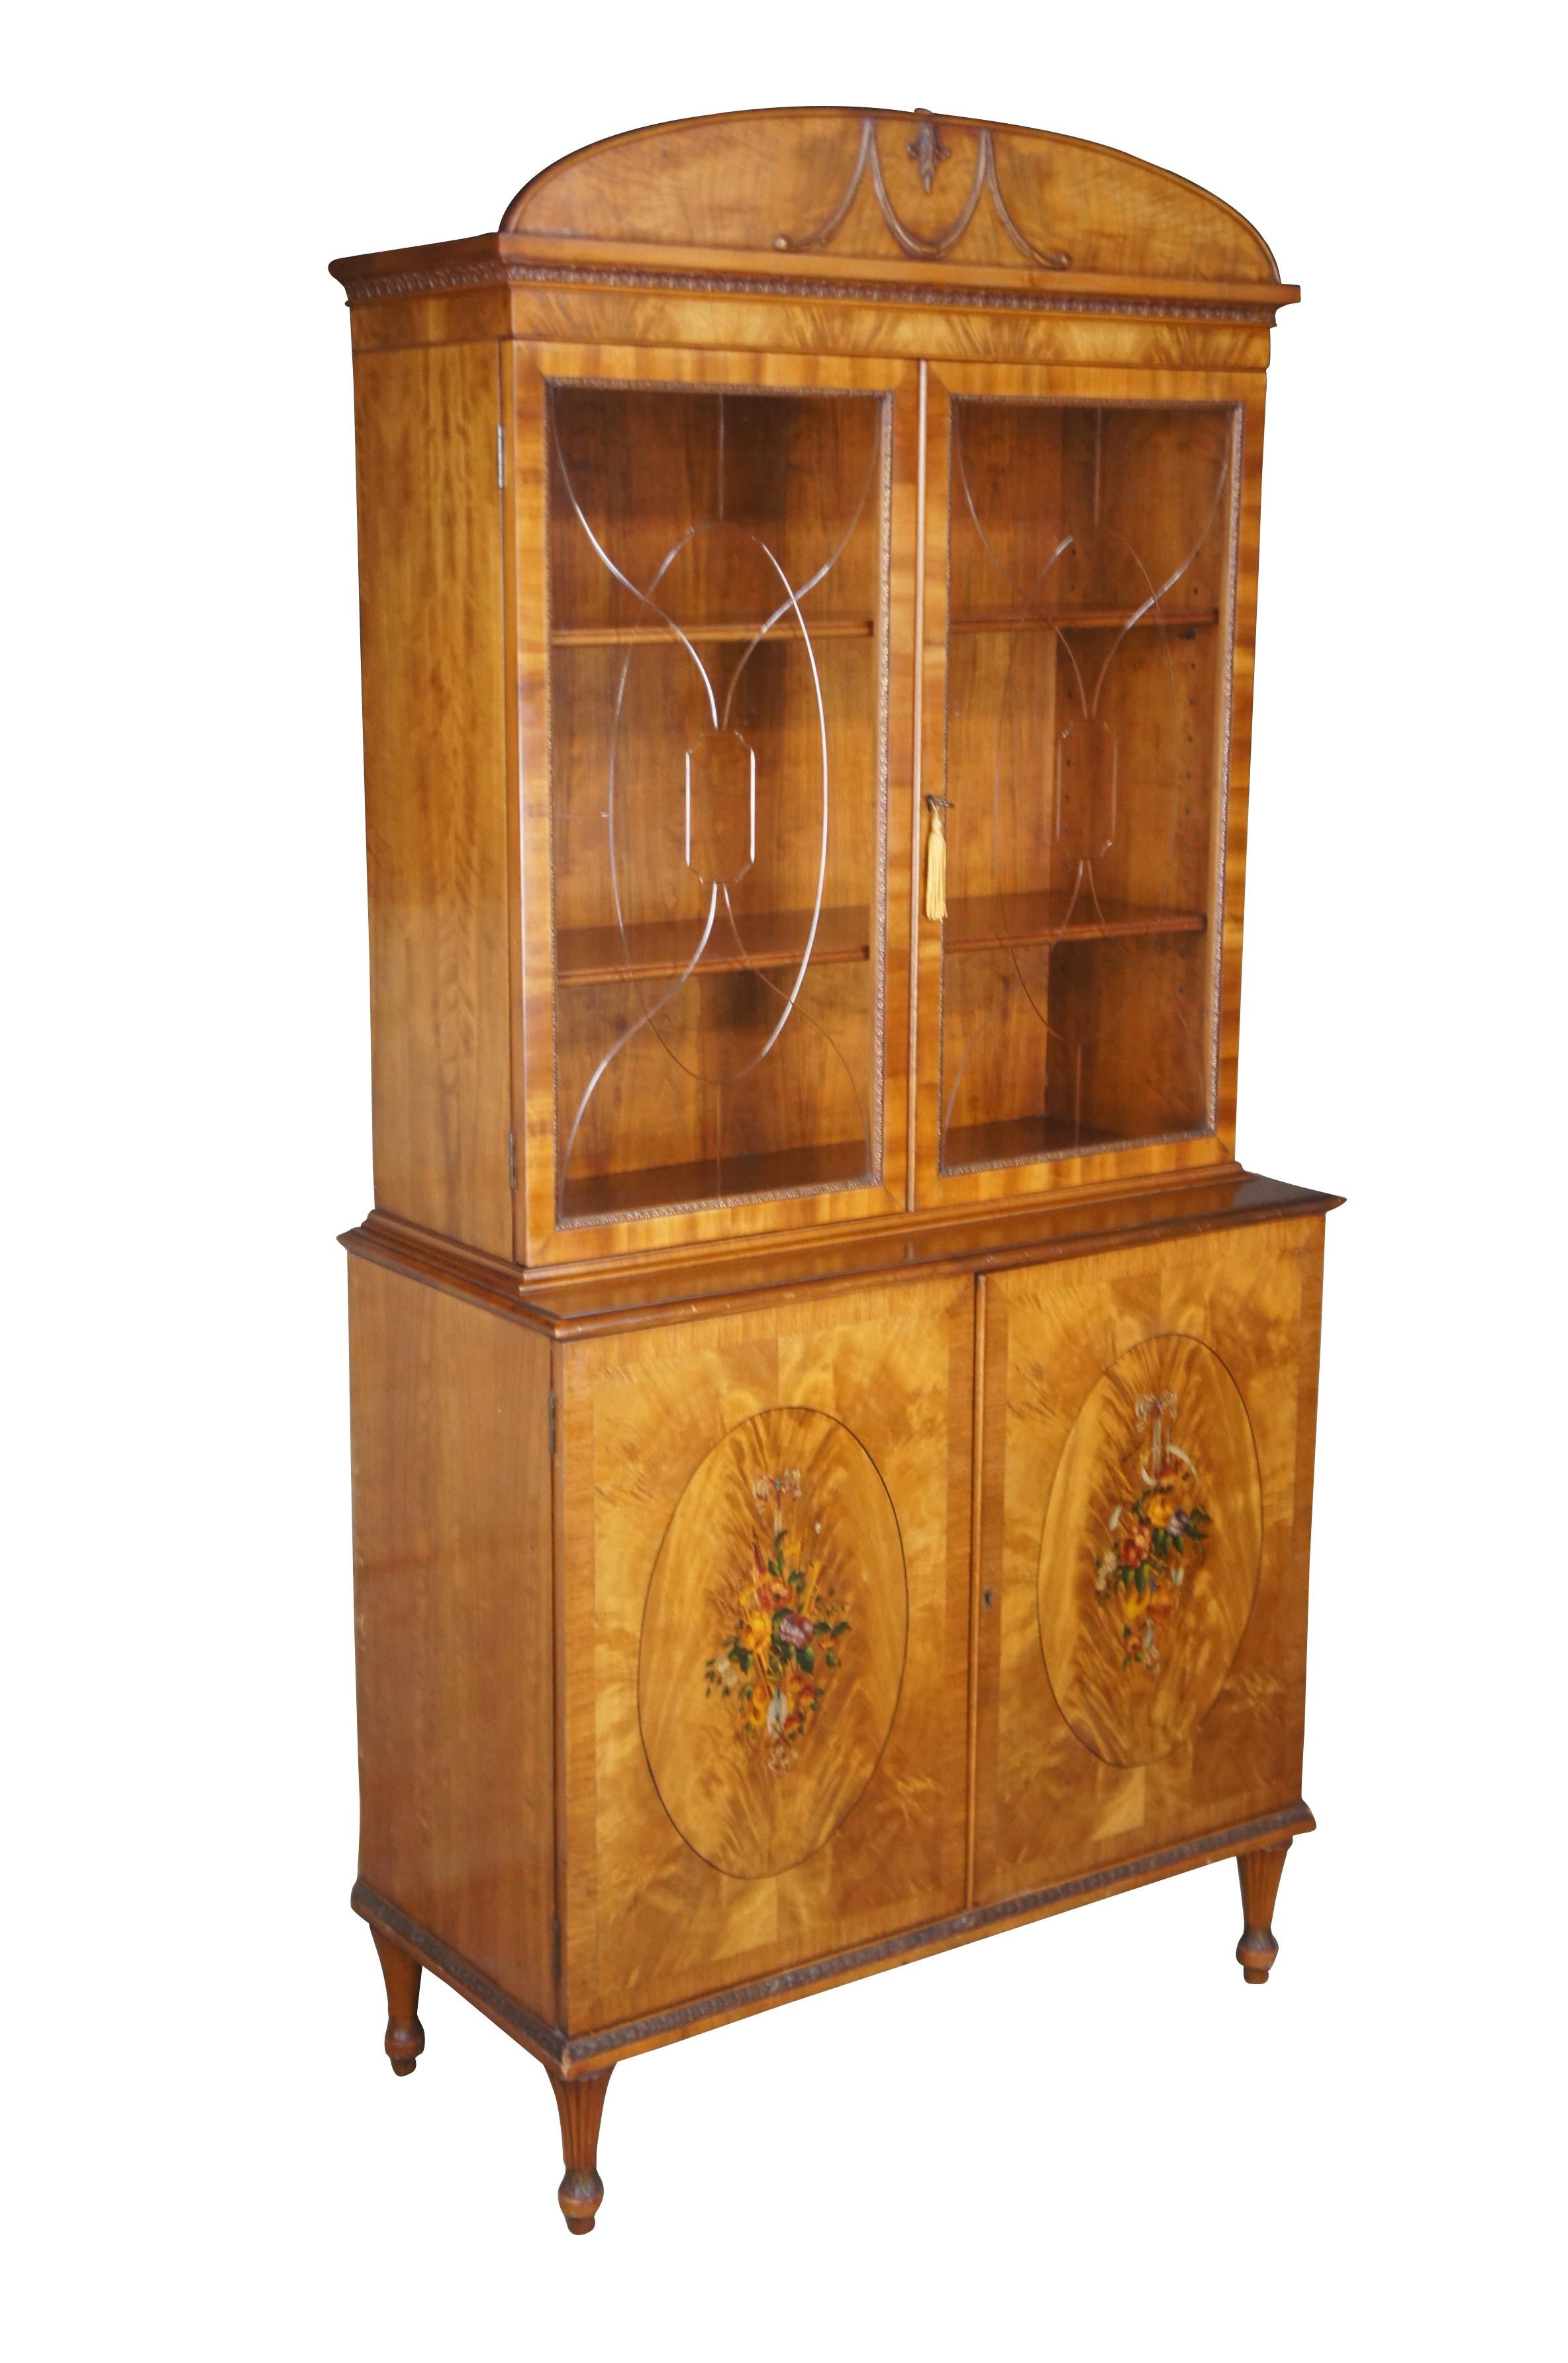 Antique early 20th century Italian Neoclassical china cabinet or cupboard.  Made of satinwood featuring George III style beveled glass and hand painted doors with florals, ribbons, harp, trumpet / instruments, flag, banjo, cane, sheath of wheat,